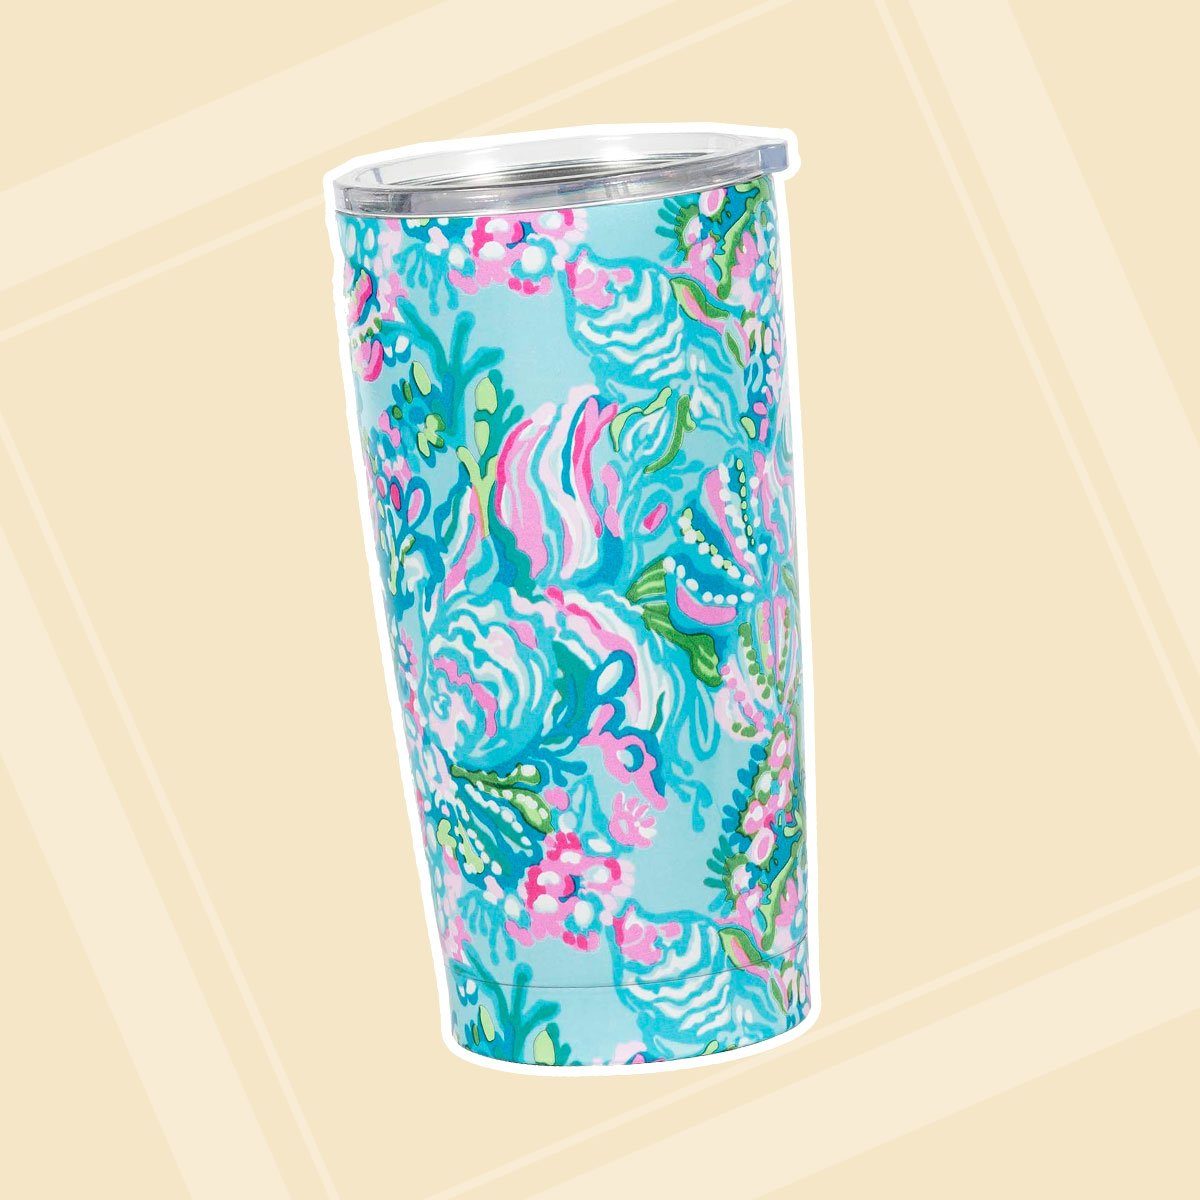 Lilly Pulitzer 20 Ounce Insulated Tumbler with Lid, Blue Stainless Steel Travel Cup, Aqua La Vista